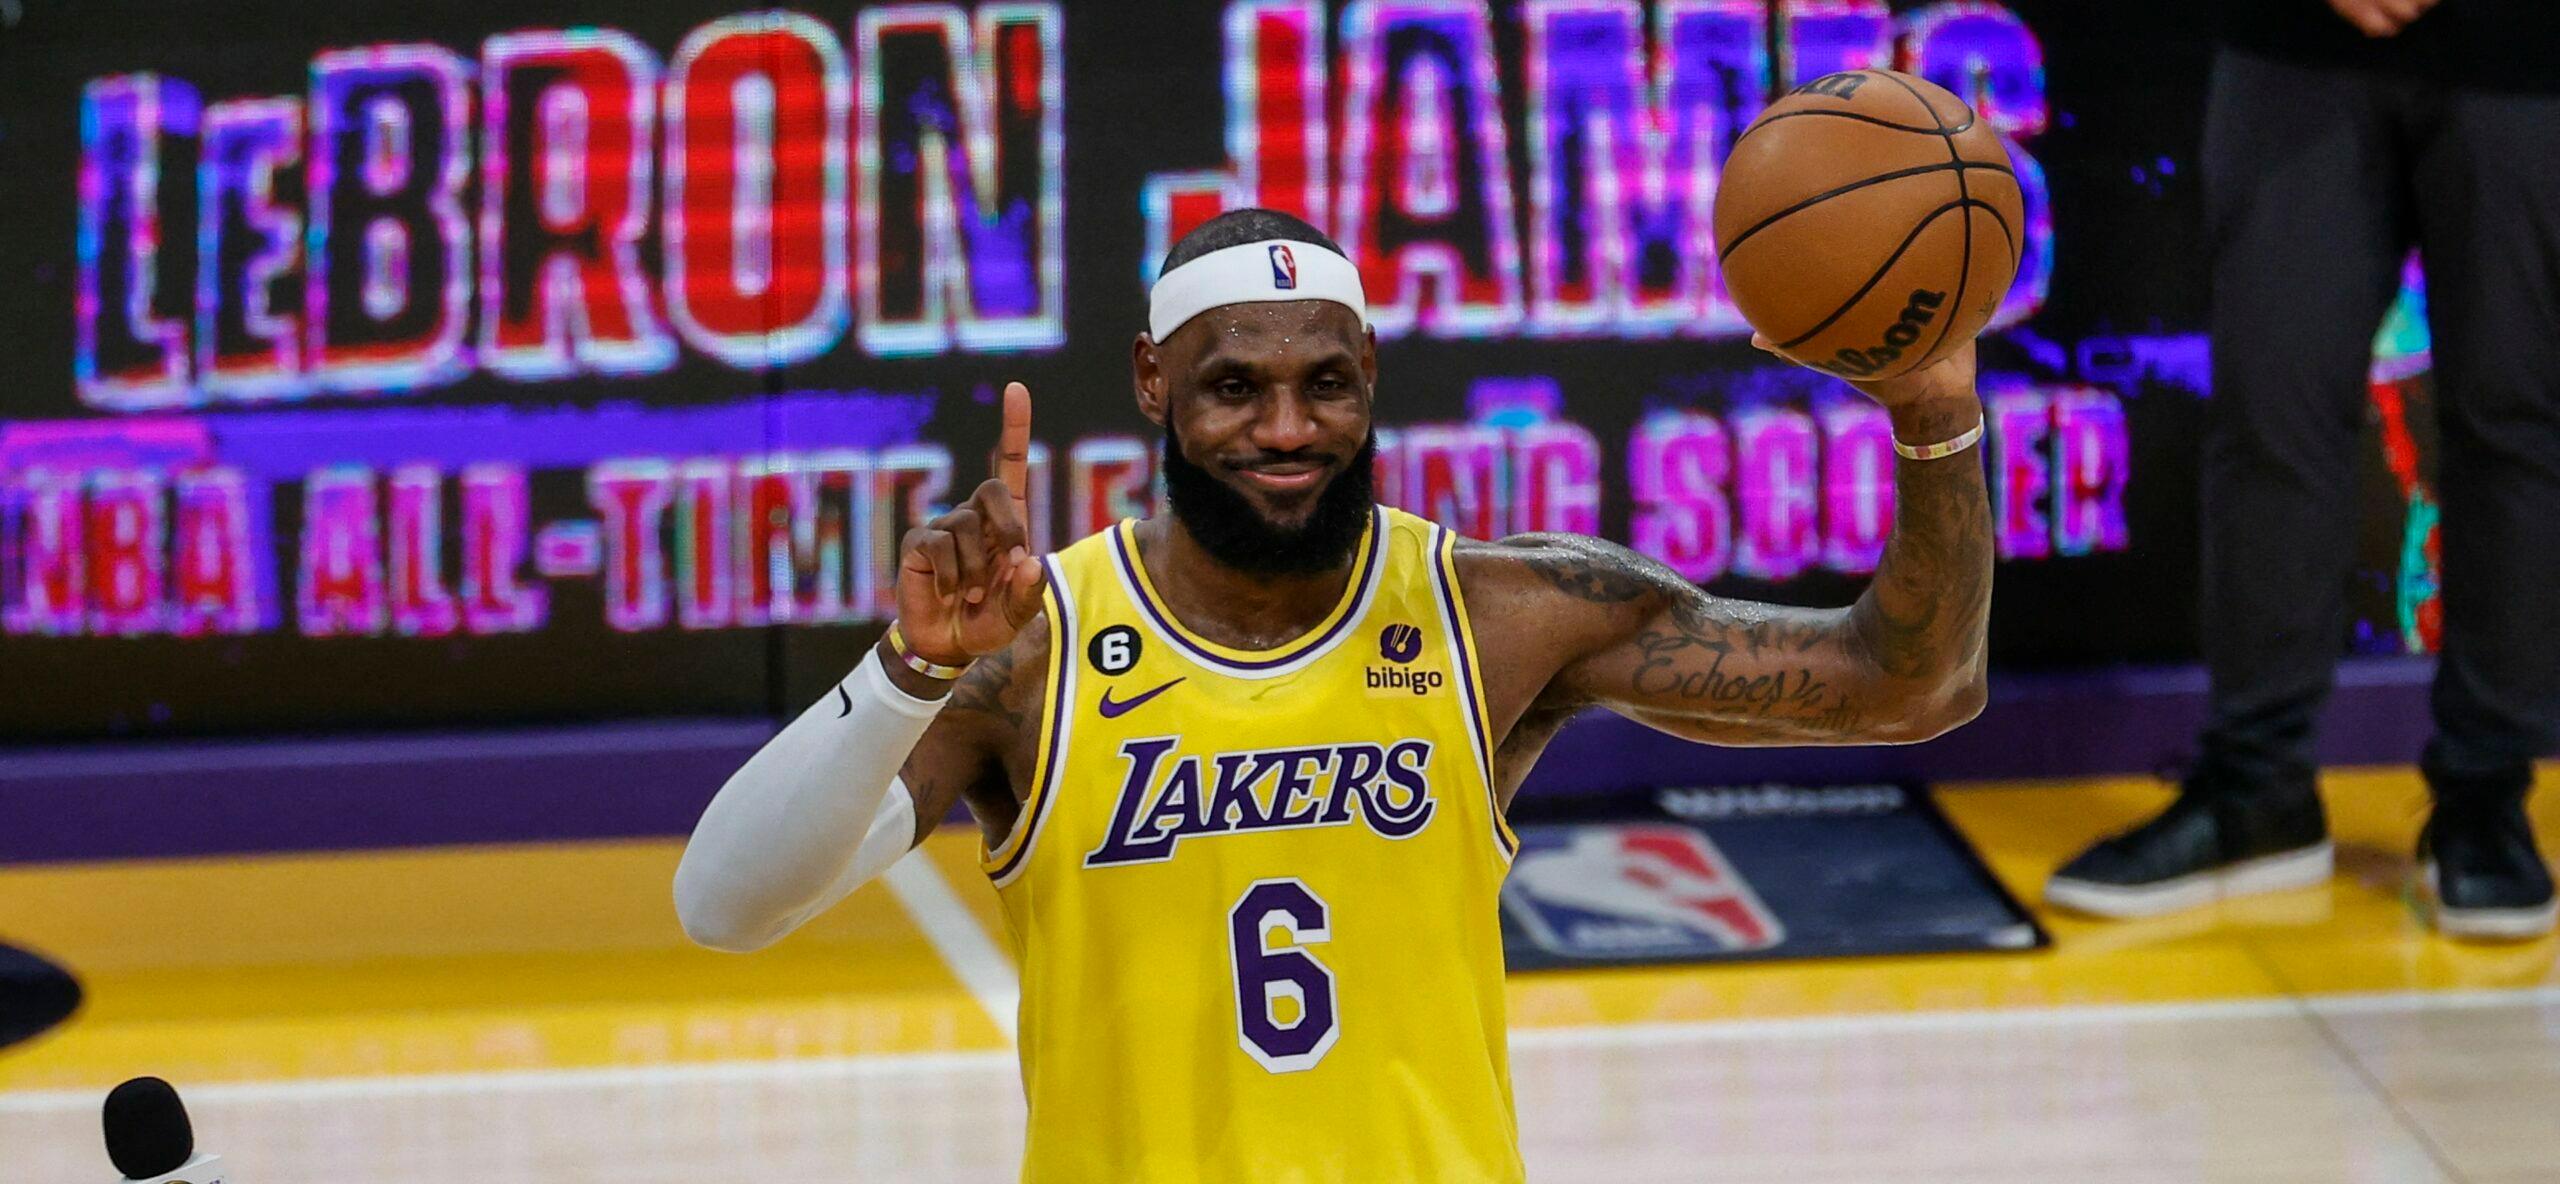 LeBron James Becomes Highest Scoring NBA Player Of All Time!